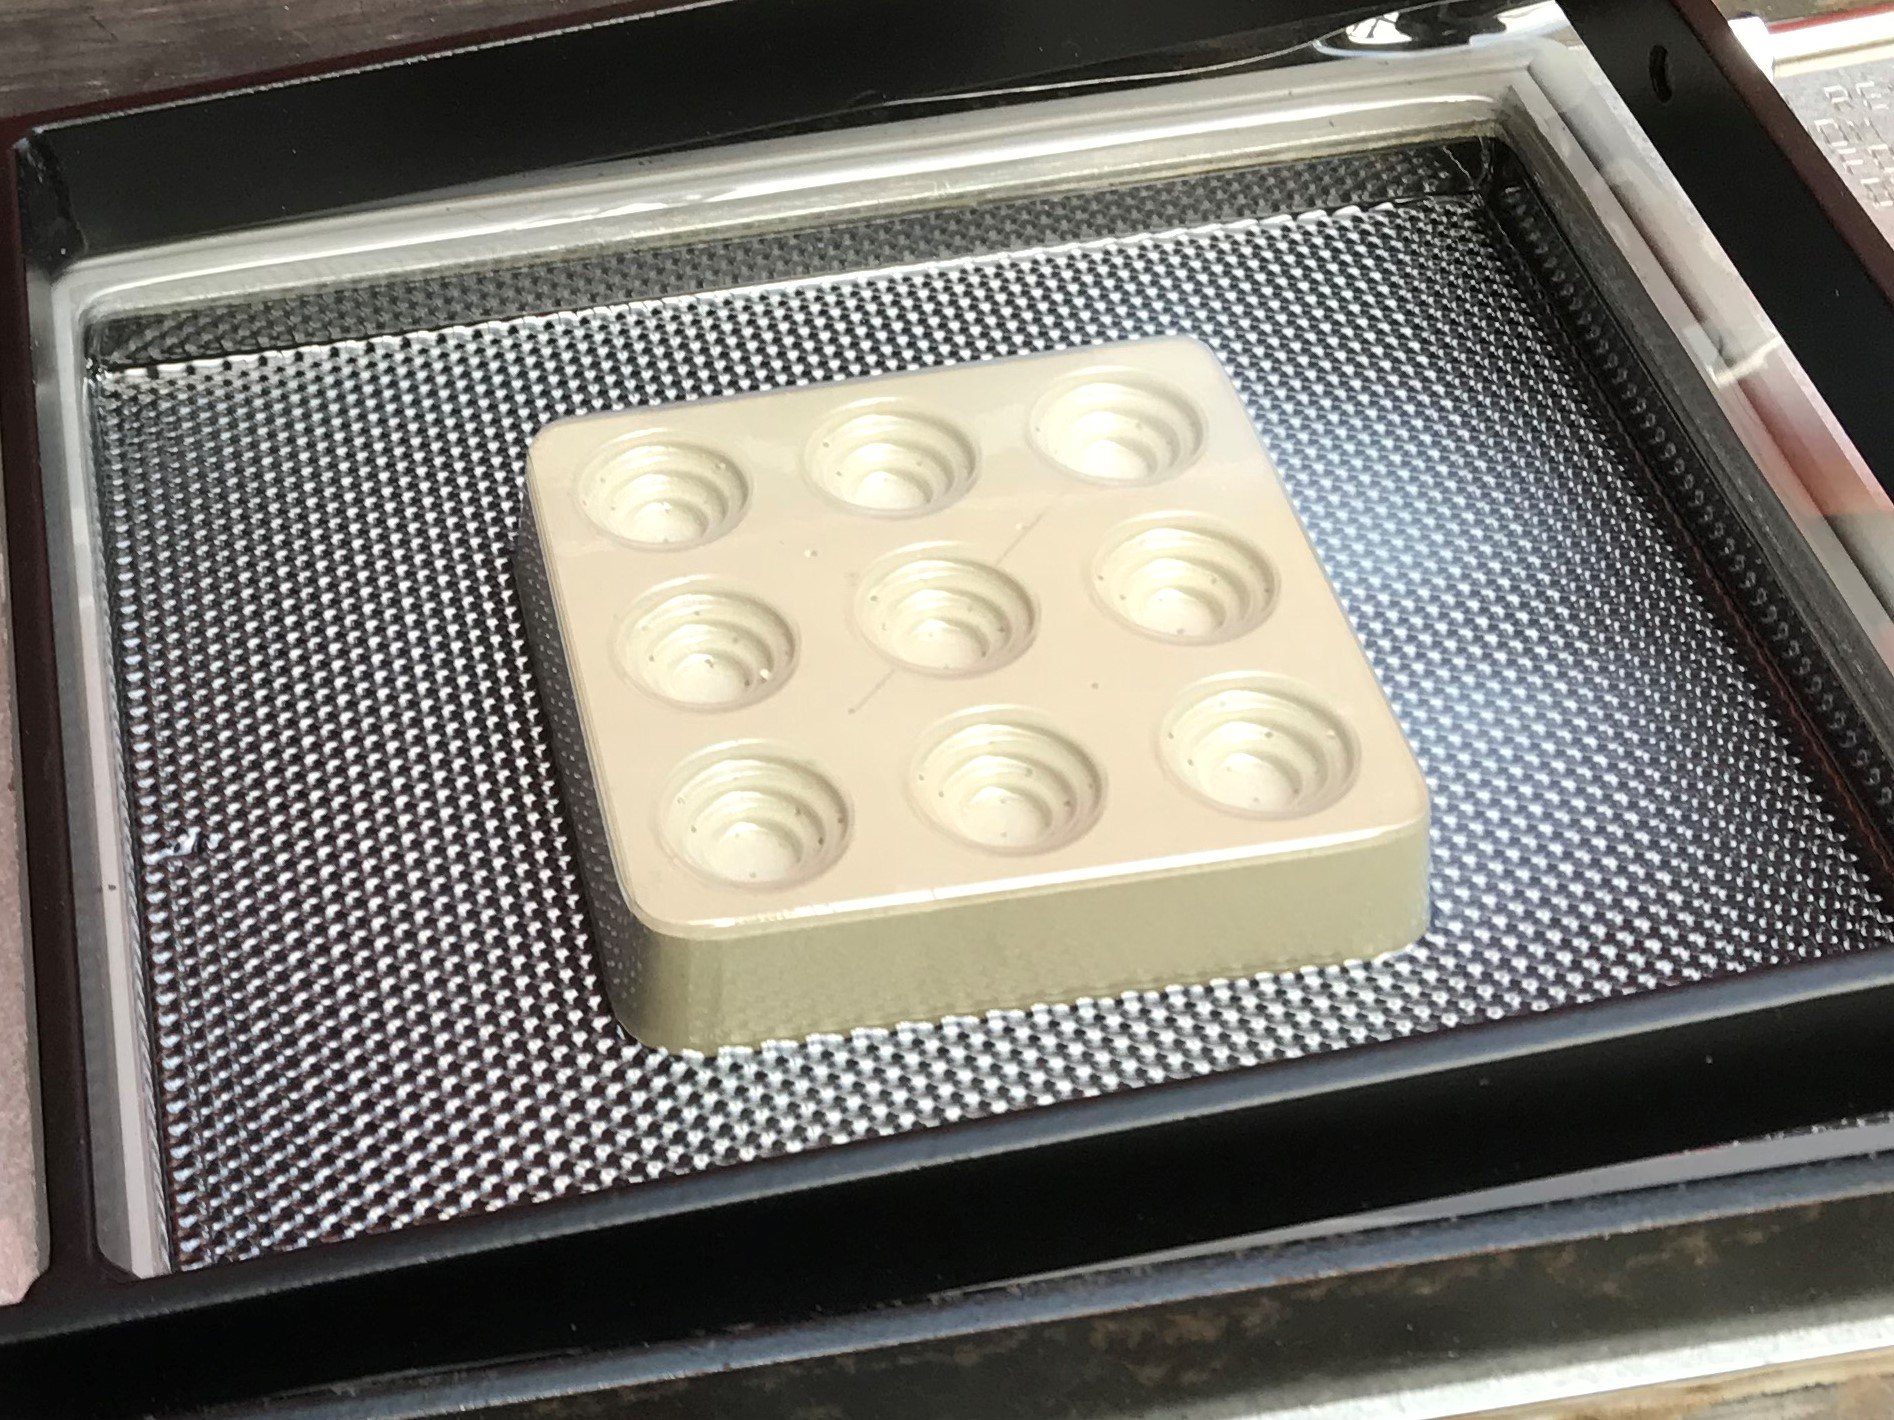 Solving Problems Through Thermoforming